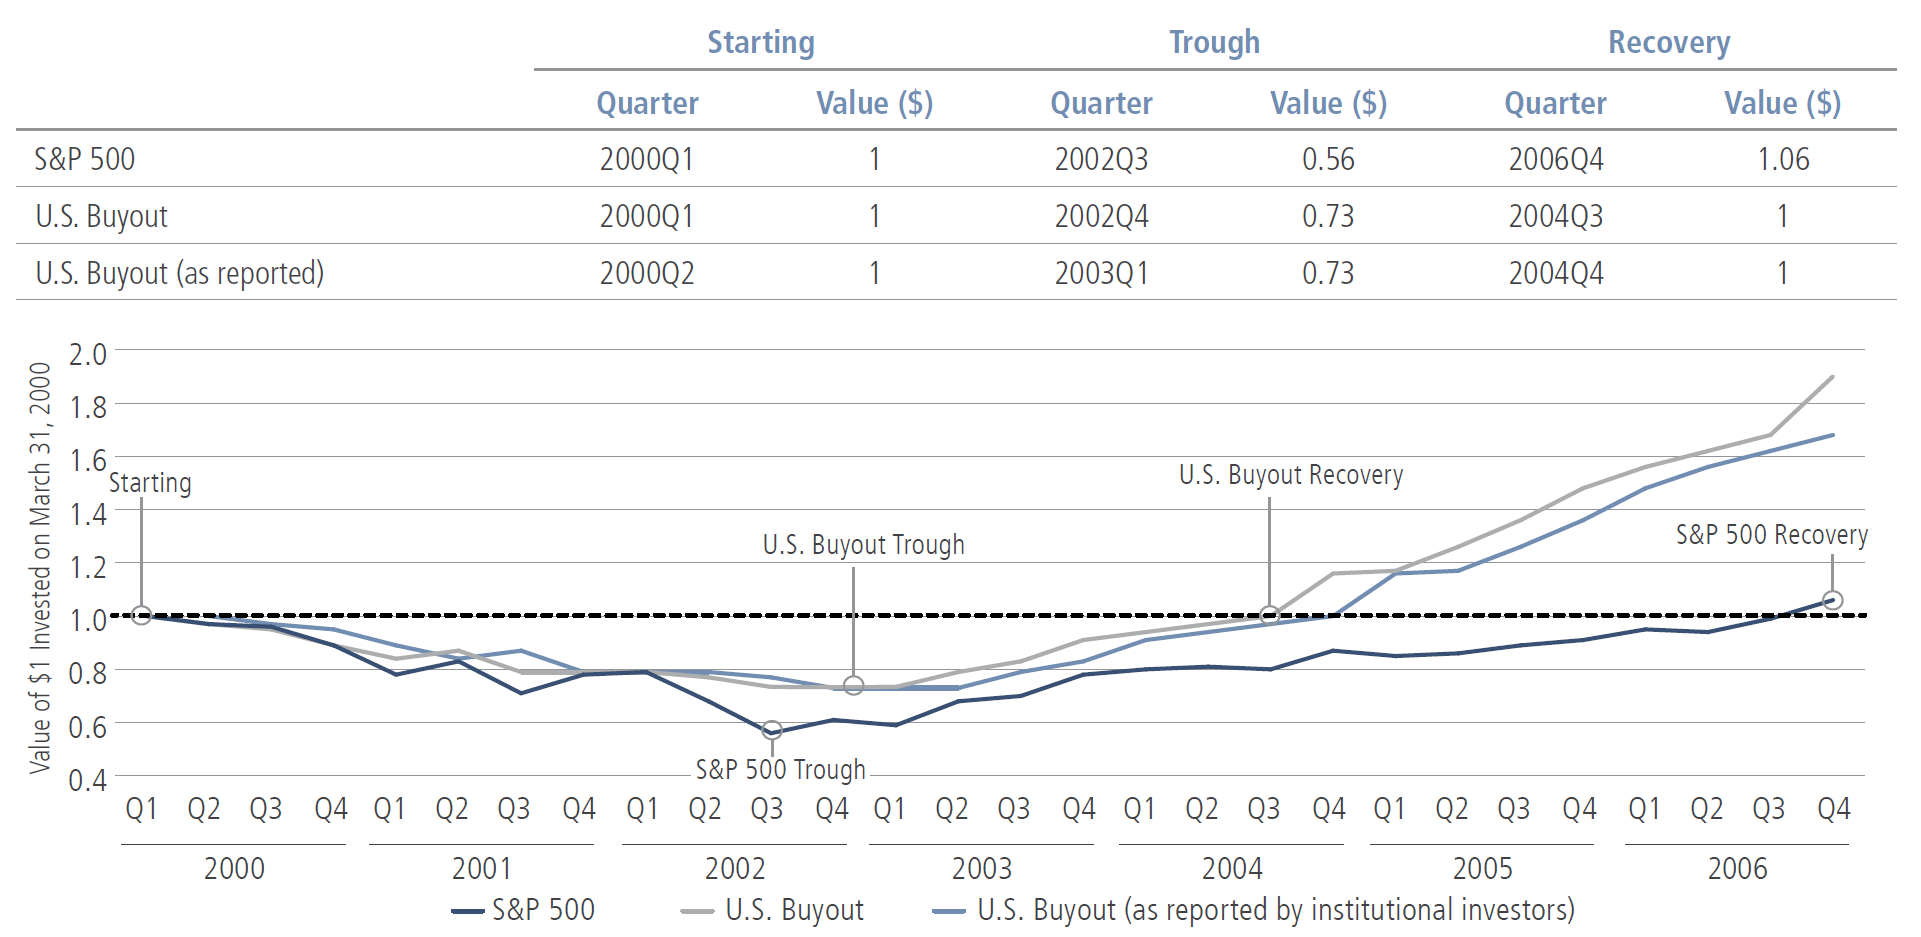 The Role Of Private Equity During Market Downturns: Performance Of S&P500 And U.S. Buyout Funds (Q1 2000 – Q4 2006)